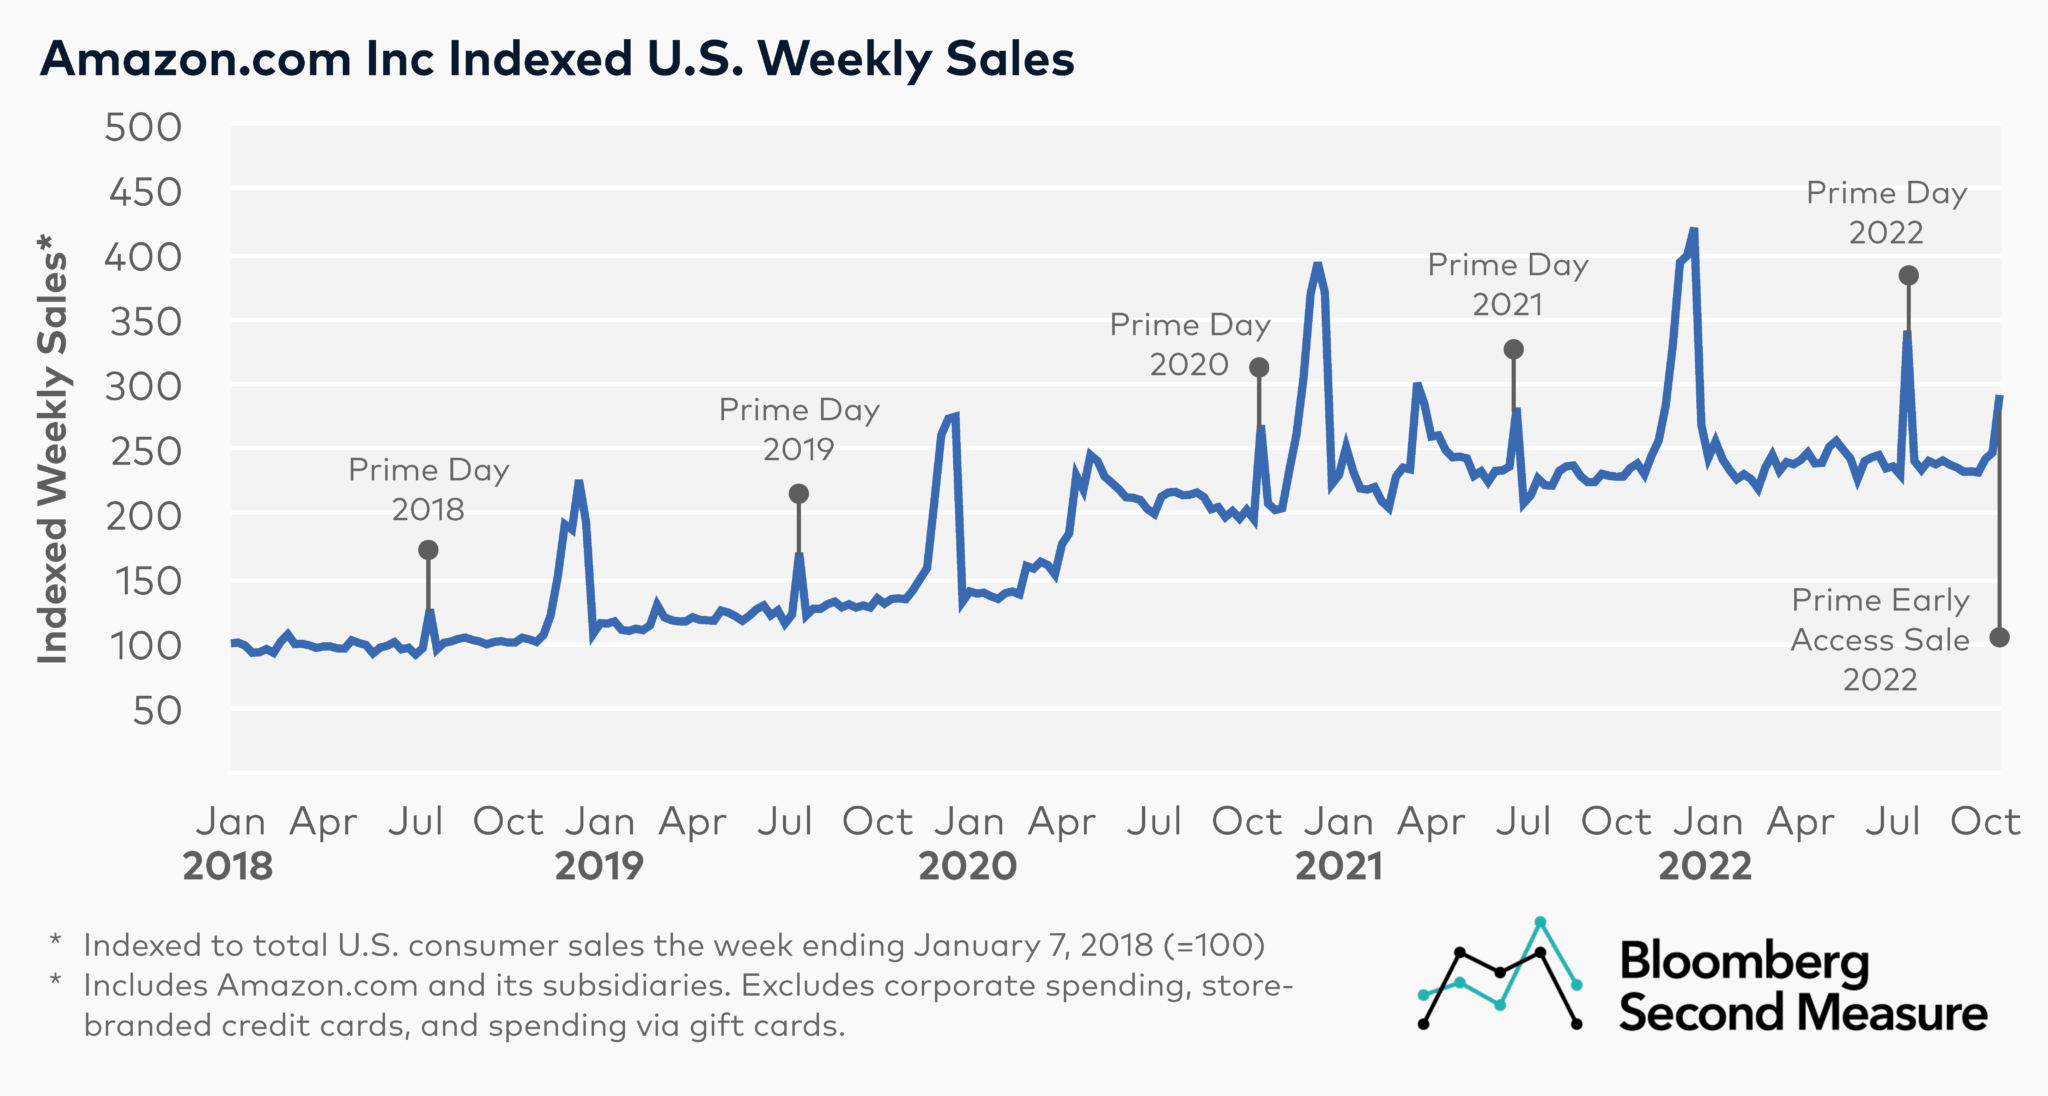 How did Amazon's surprise Prime Day compare to similar sales events?